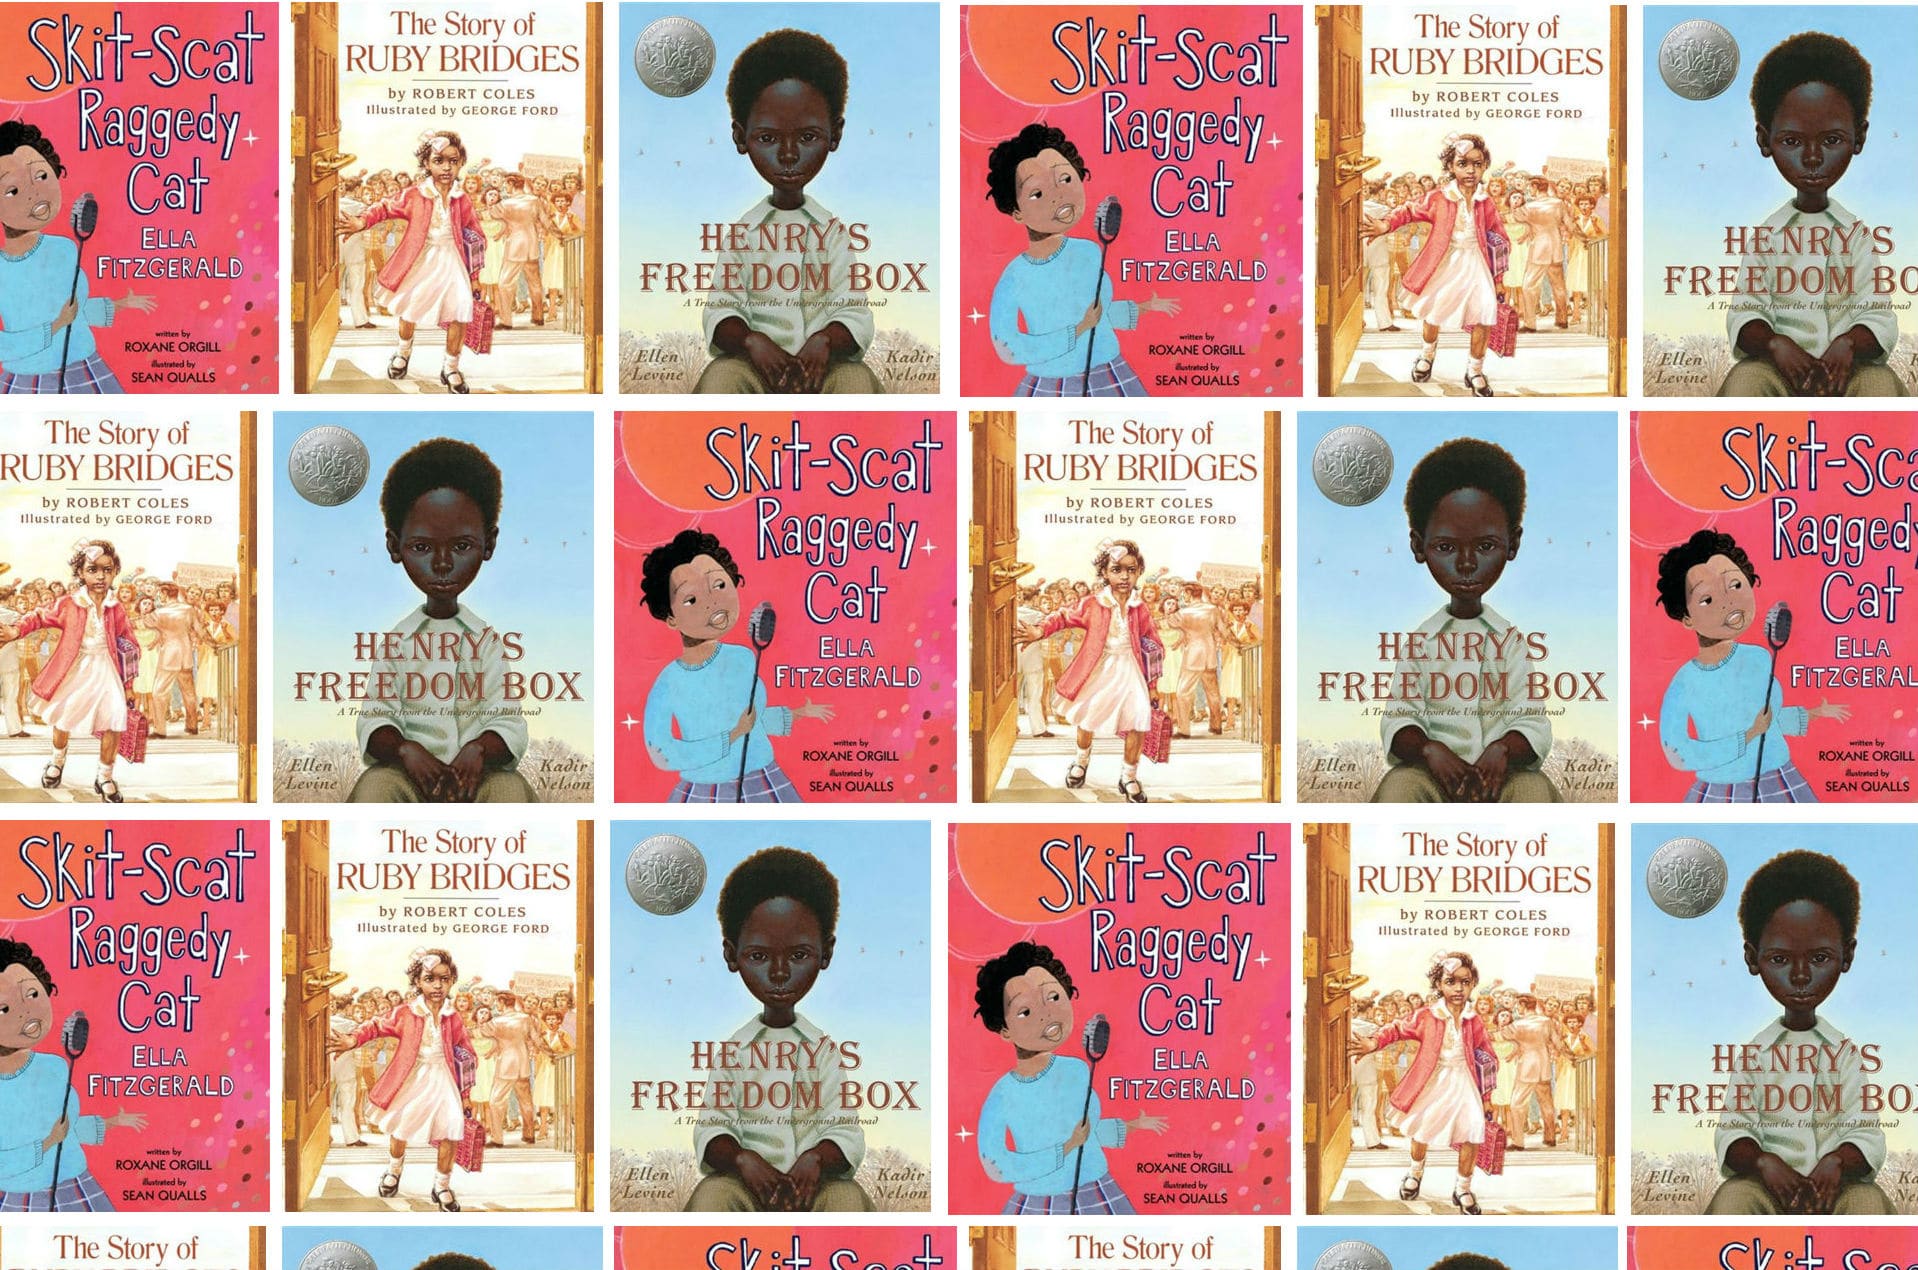 array of childrens' book covers